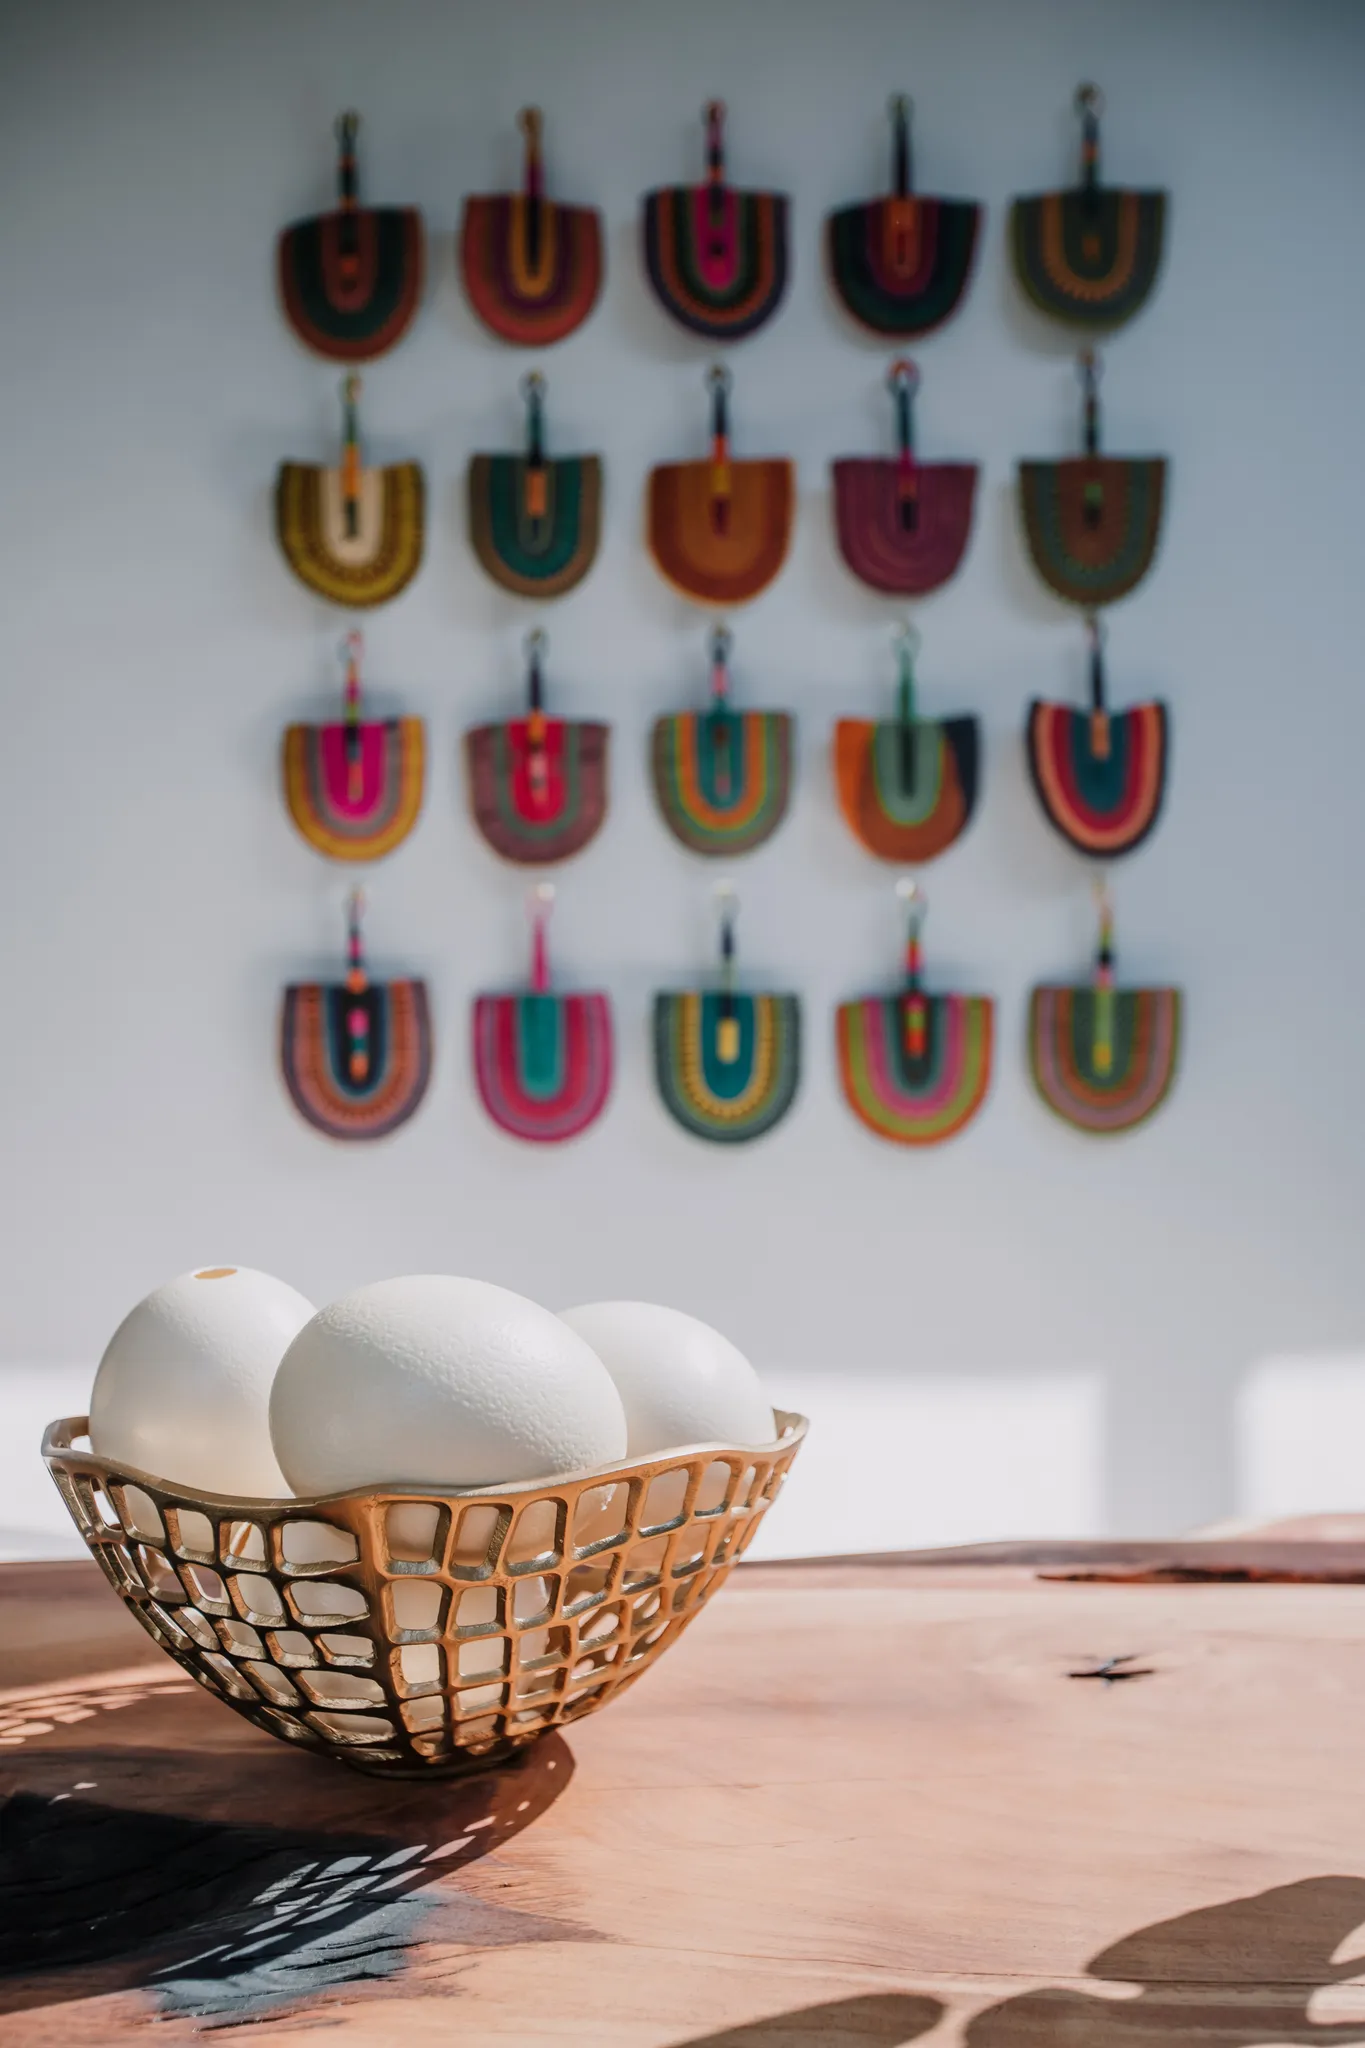 A bowl of ostrich egg decorations on a table and African decorations hanging on the wall.